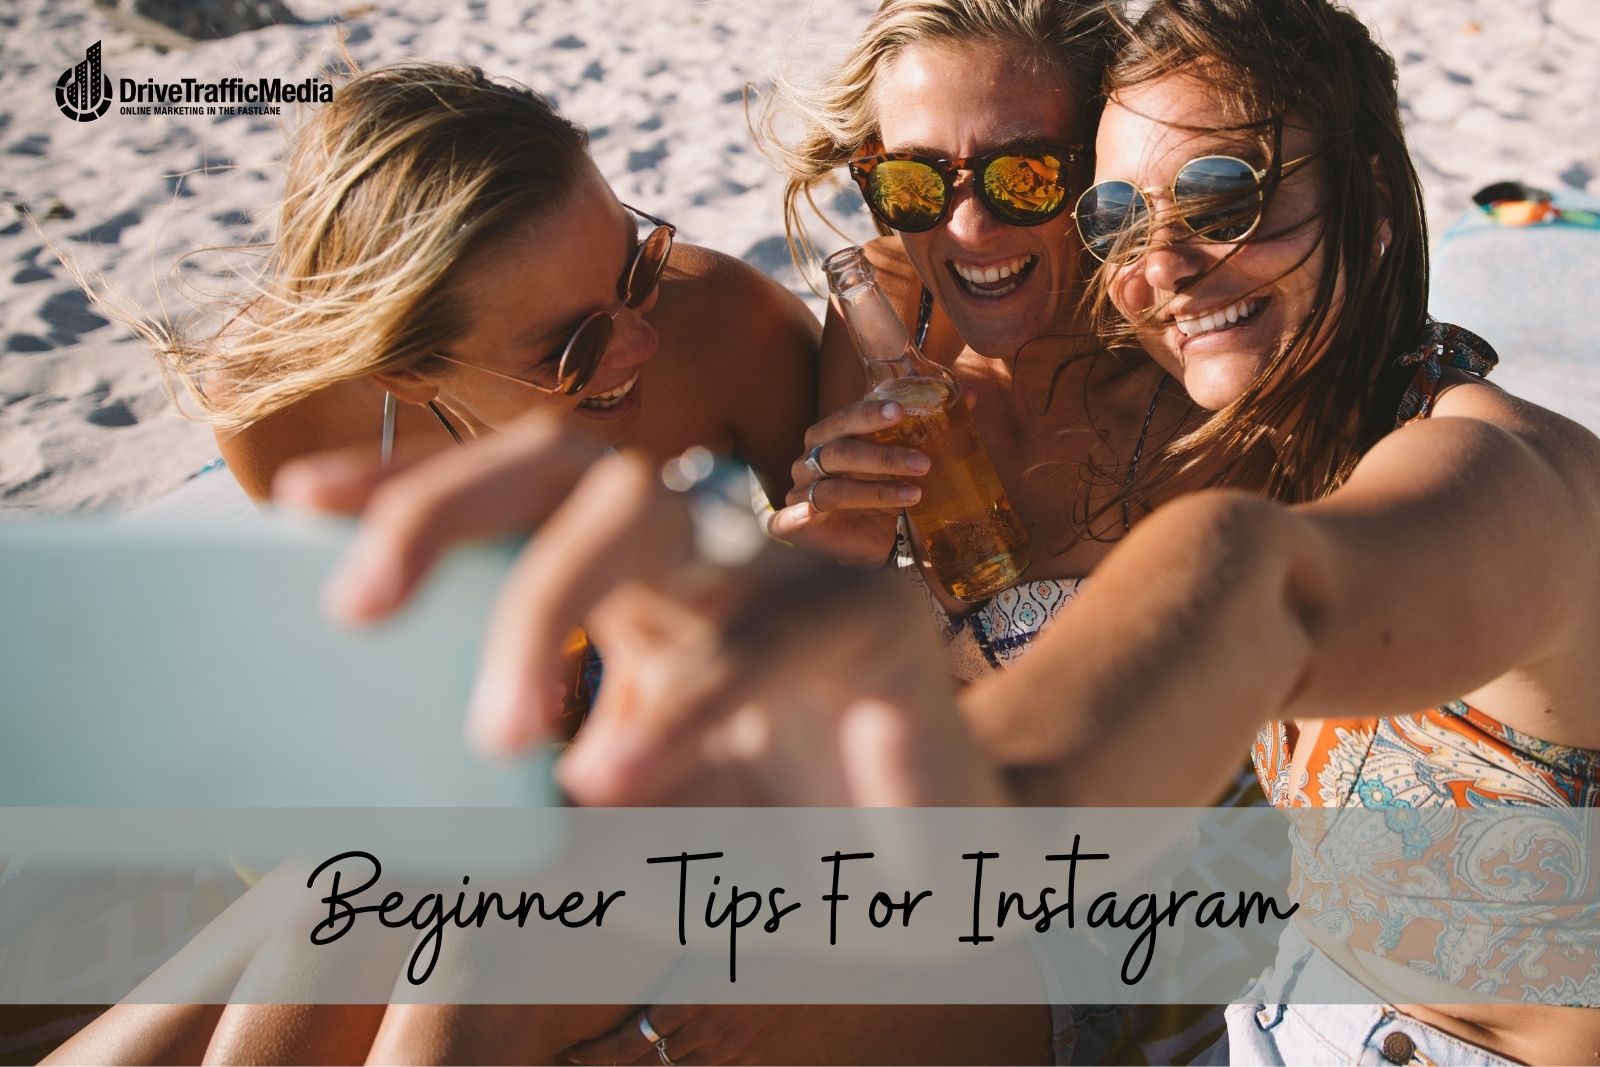 For-those-marketing-on-social-media-getting-started-on-Instagram-can-be-the-key-to-it